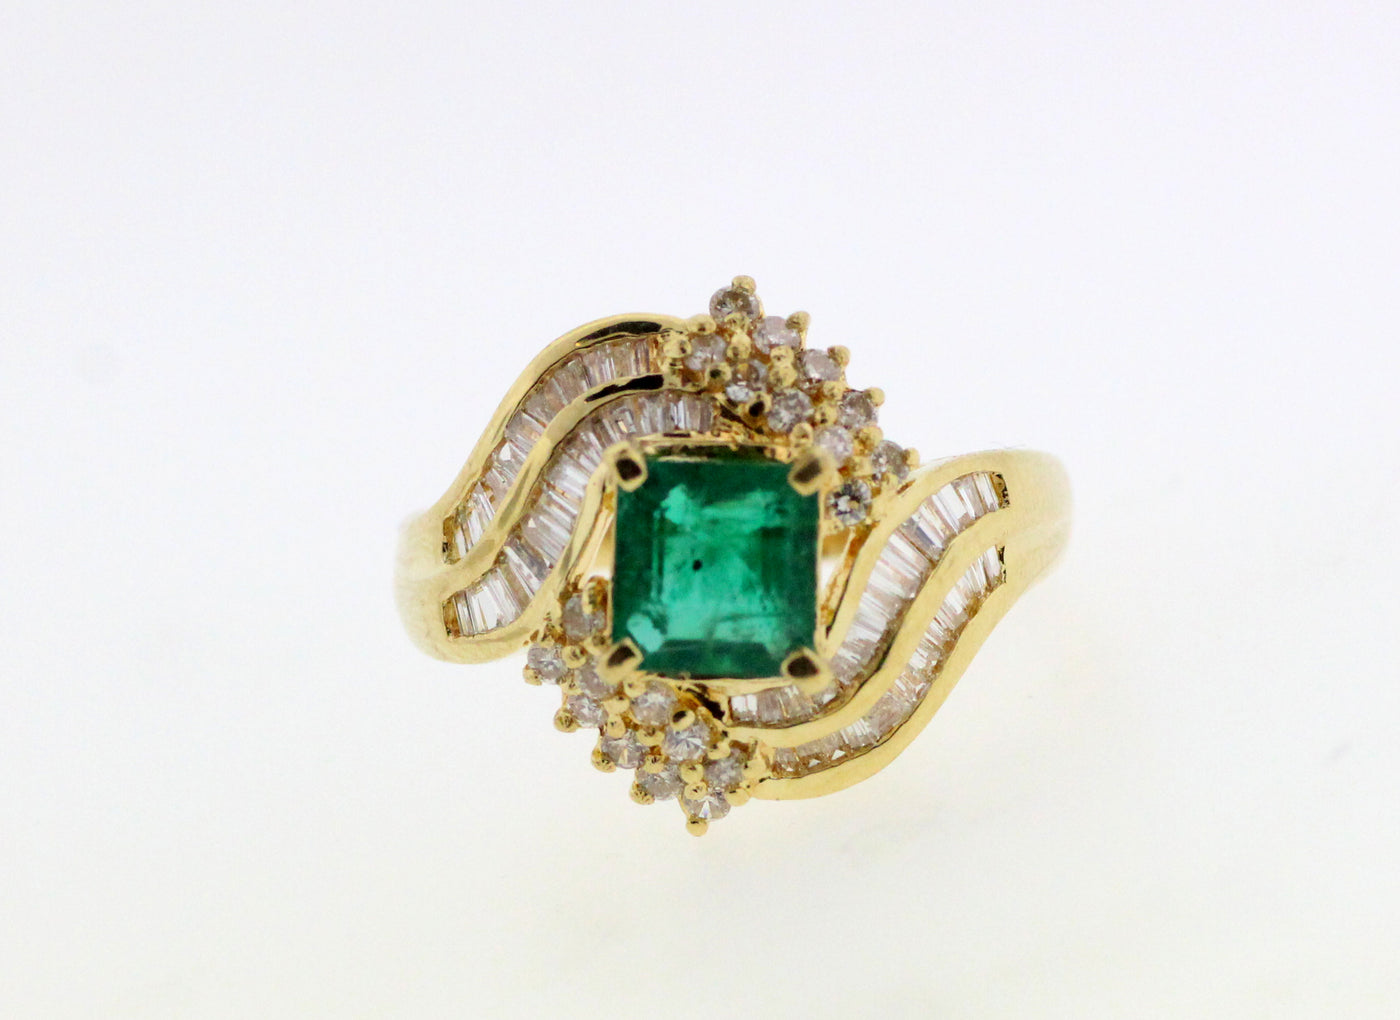 ESTATE 18KY 1.18 CT EMERALD AND DIAMOND RING .76 CTTW